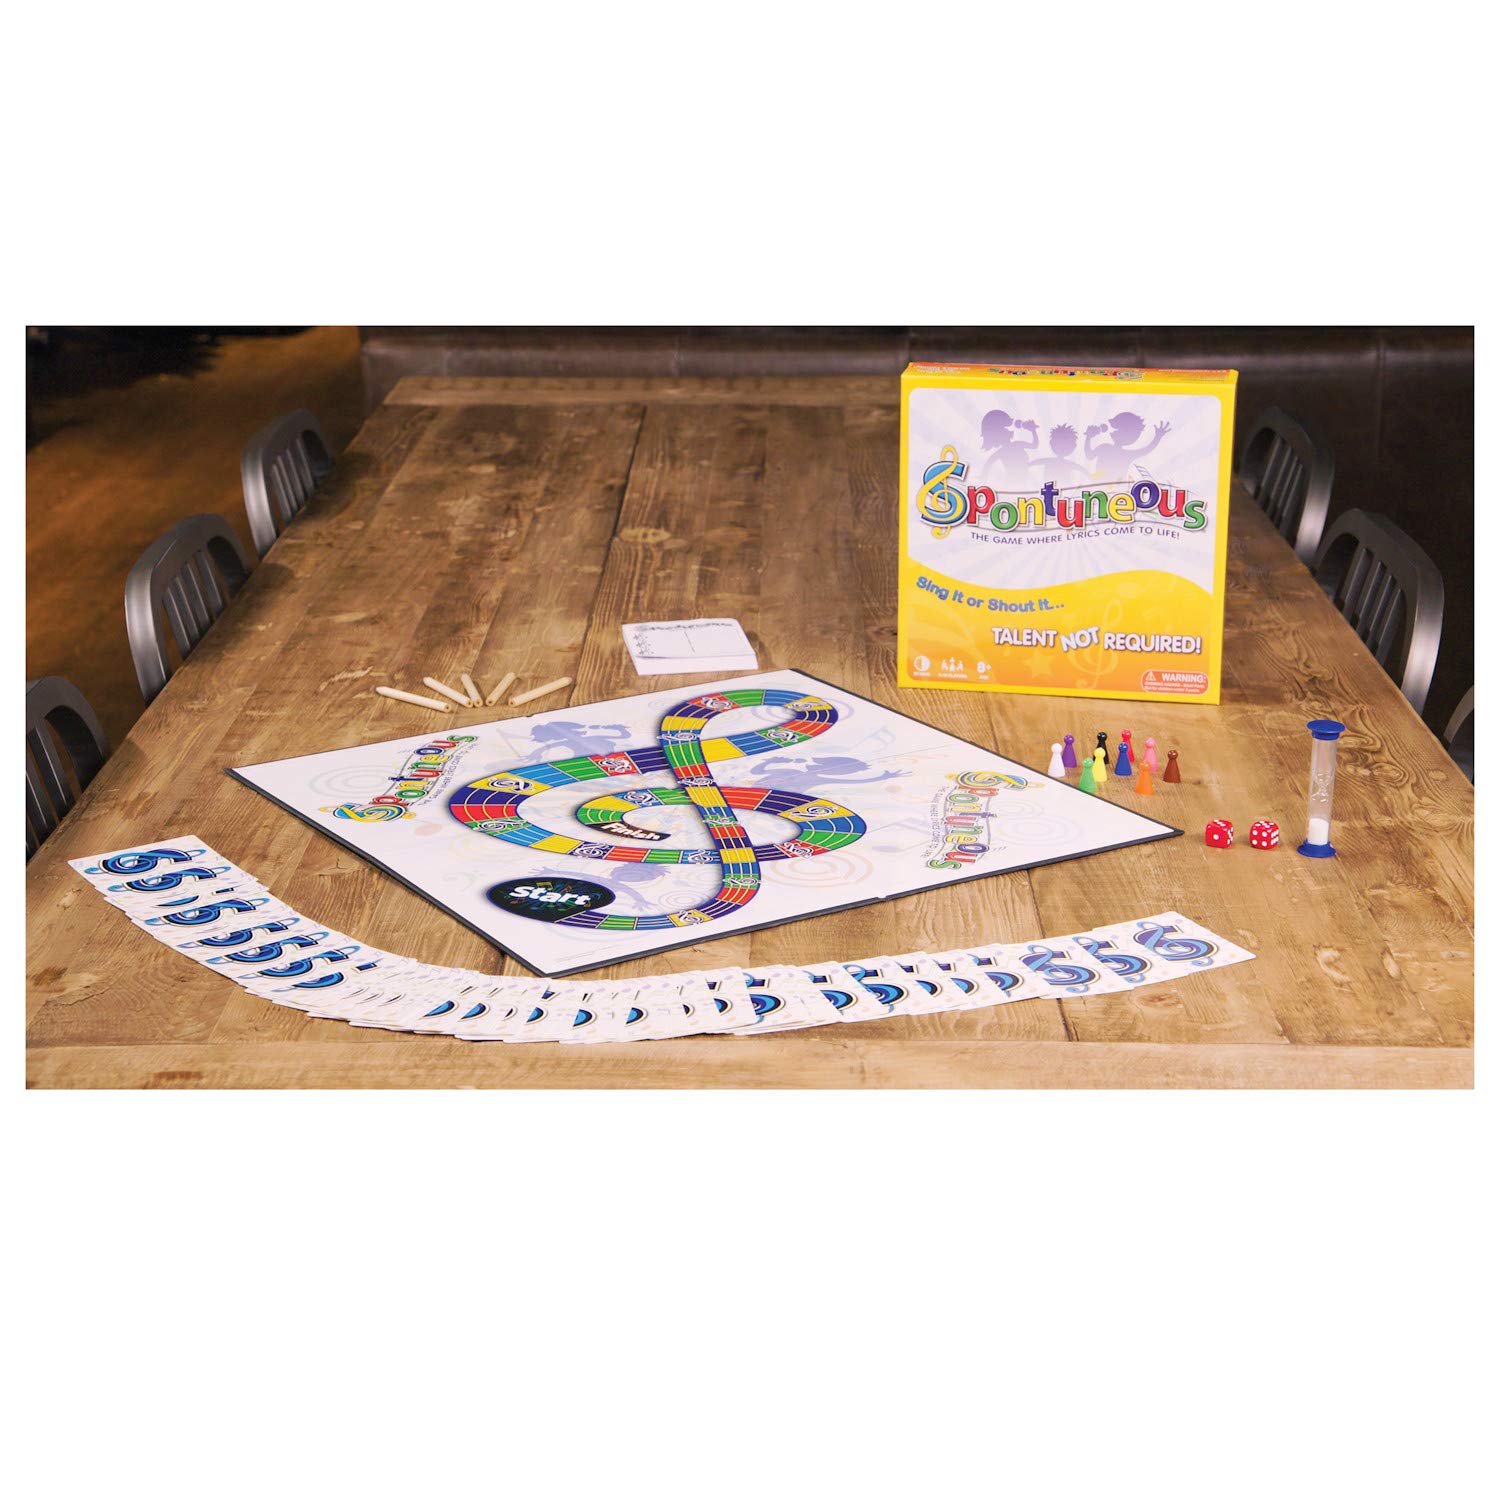 Spontuneous - The Song Game - Sing It or Shout It - Talent NOT Required - Family Party Board Game…